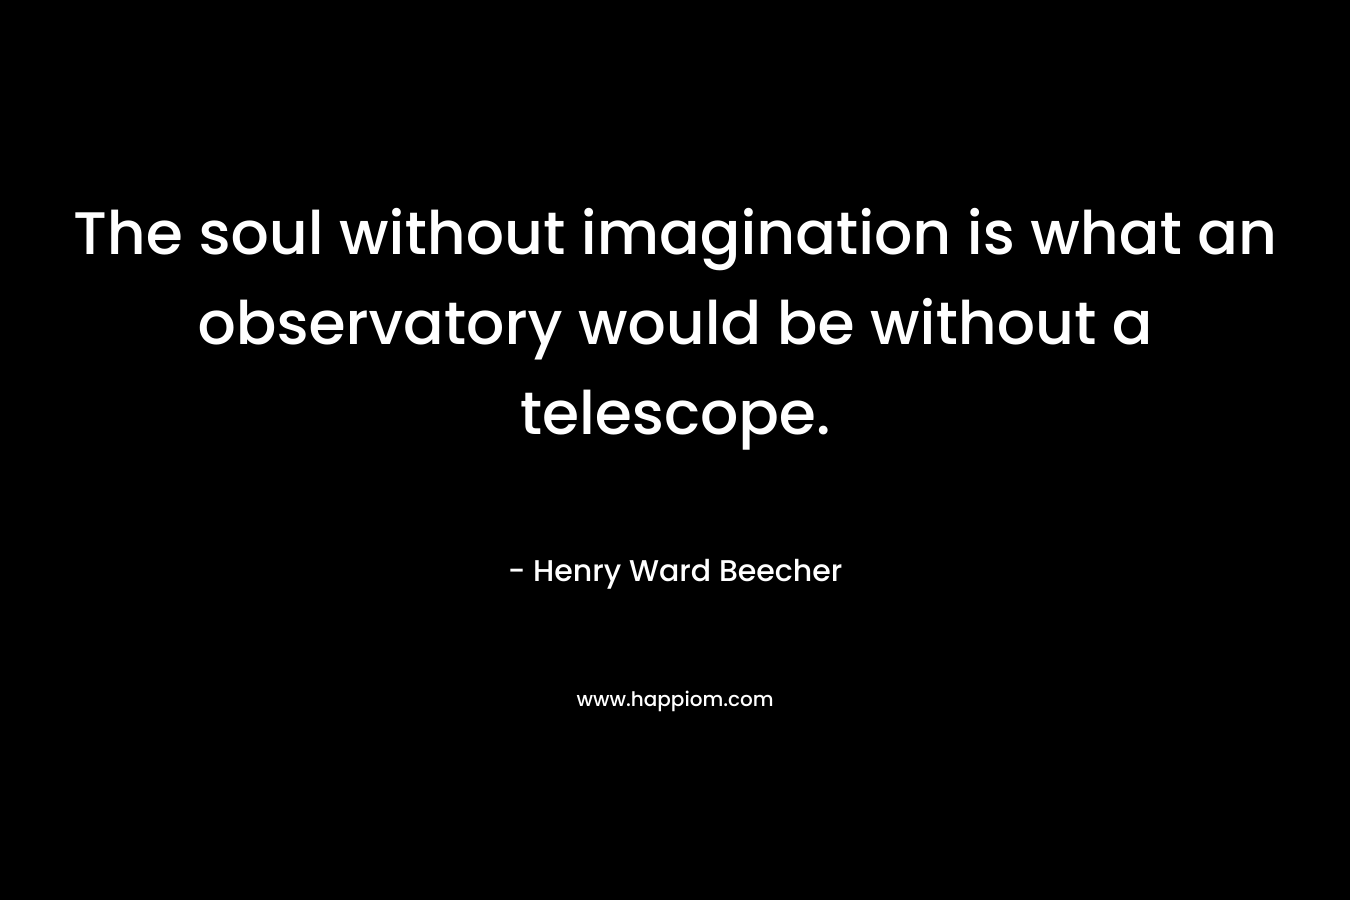 The soul without imagination is what an observatory would be without a telescope. – Henry Ward Beecher